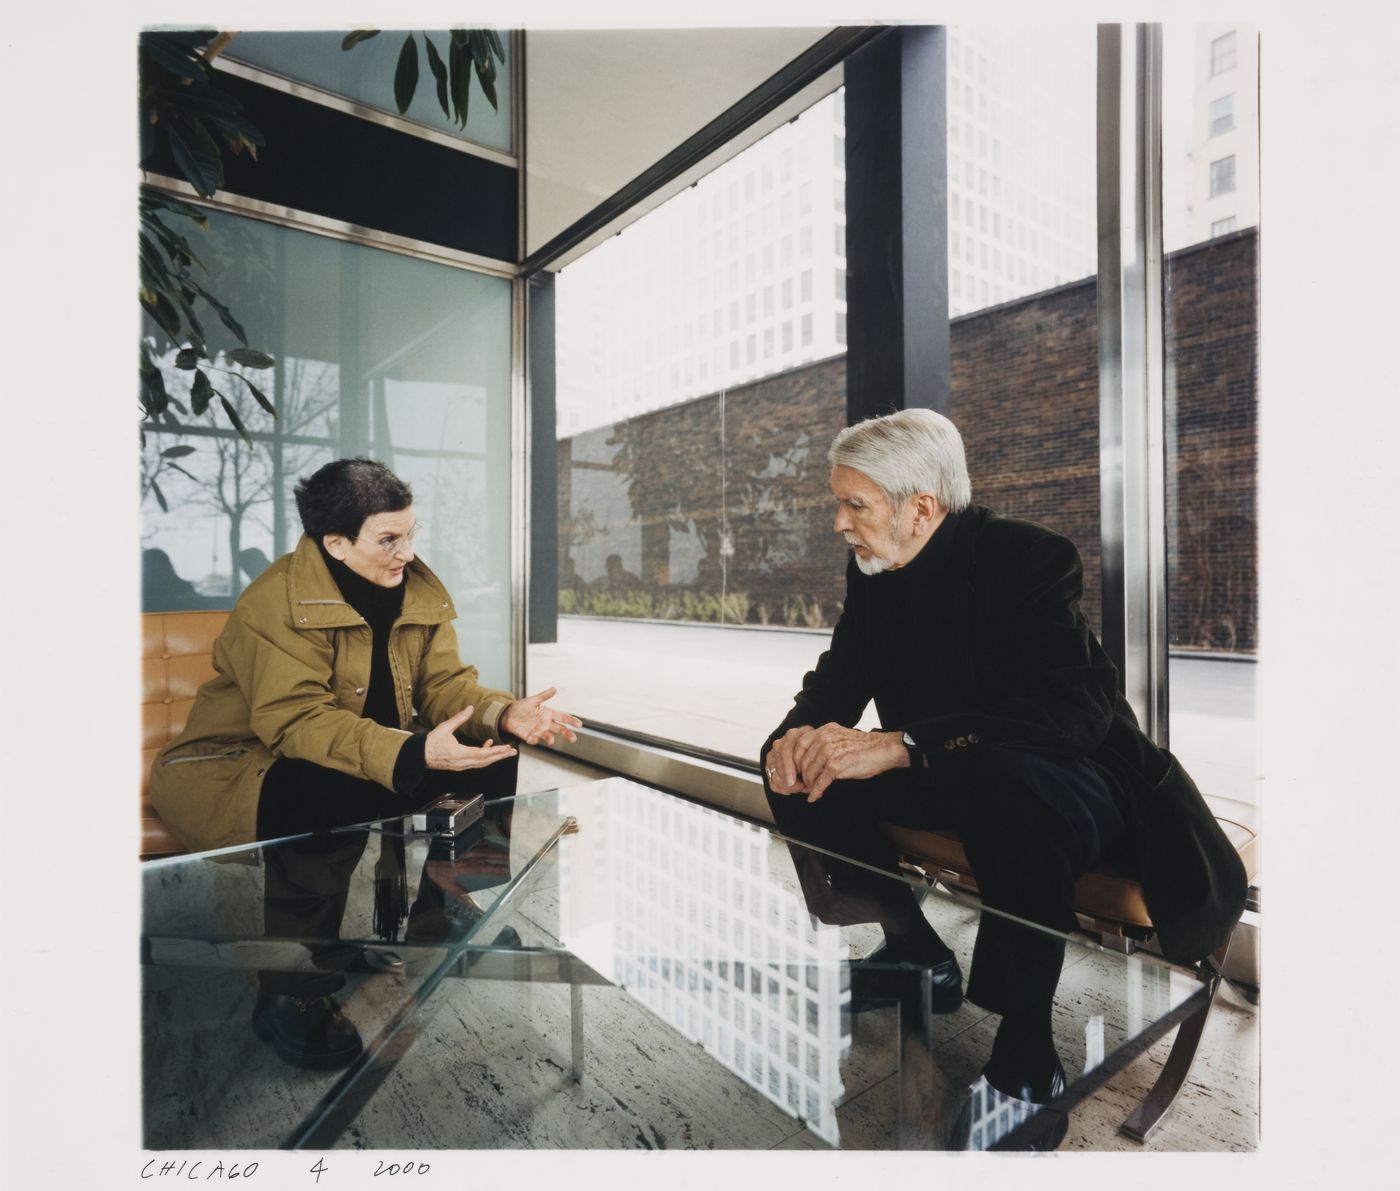 Interior view of the lobby of 880 Lake Shore Drive Apartments showing Phyllis Lambert and the architect George Danforth, Chicago, Illinois